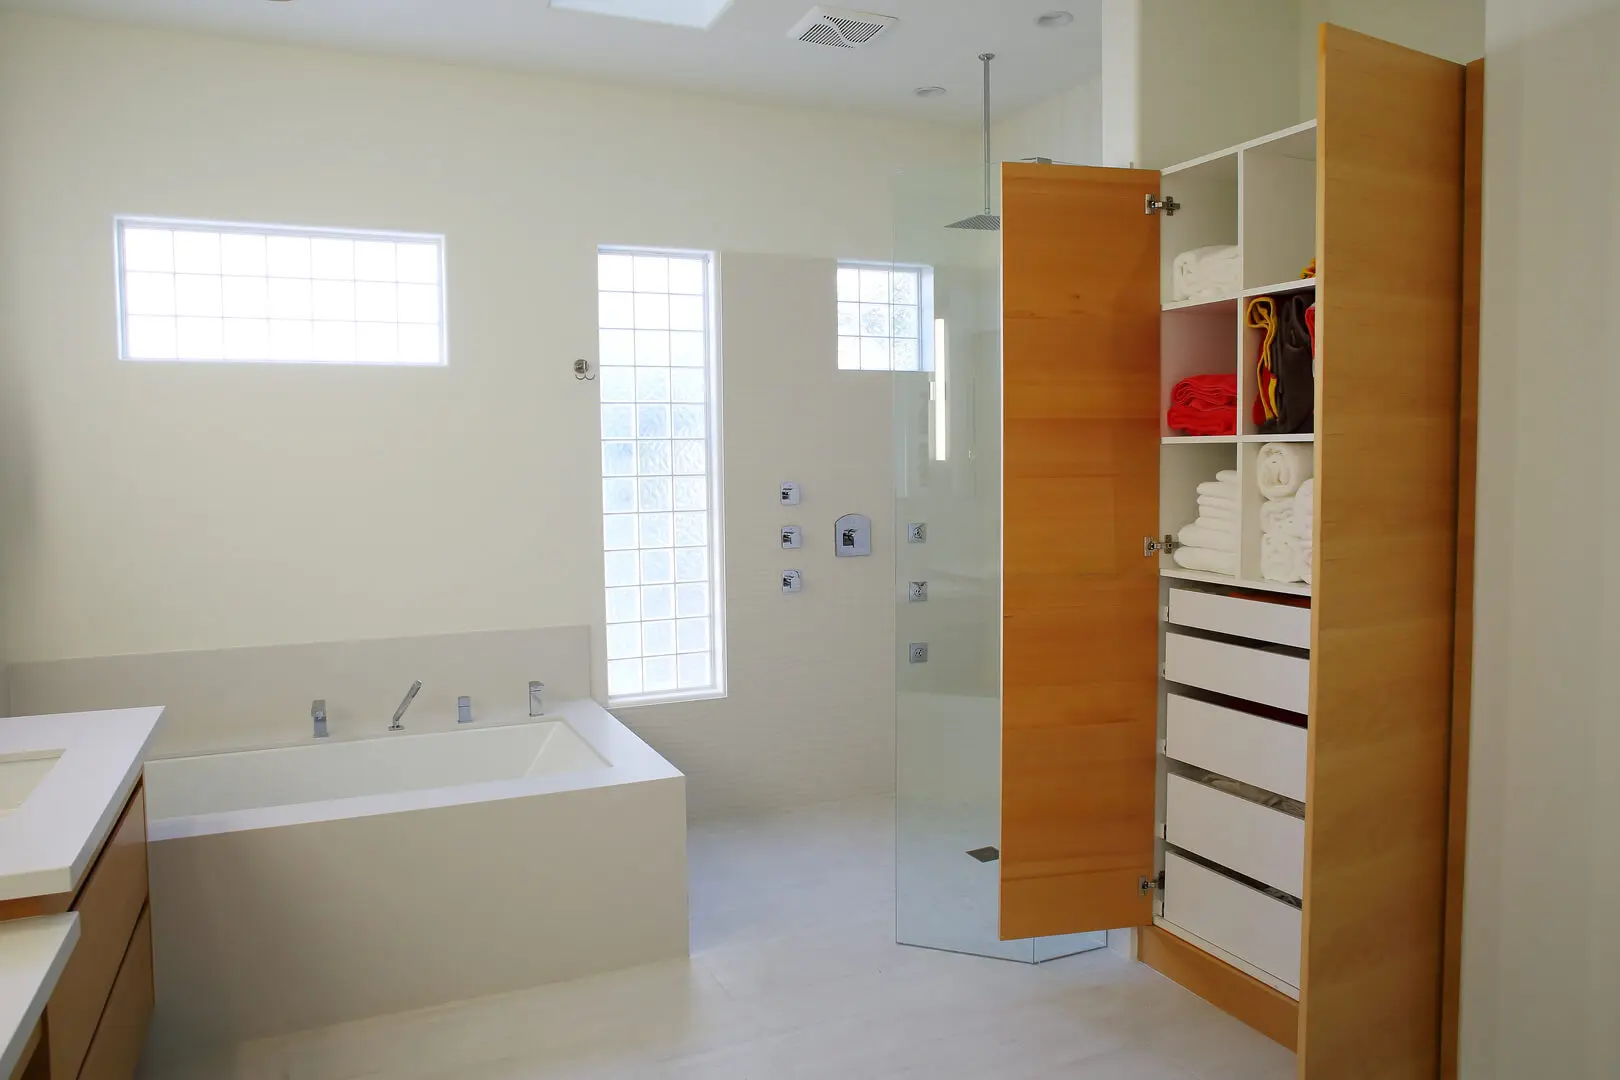 A bathroom with a tub, shower and toilet.